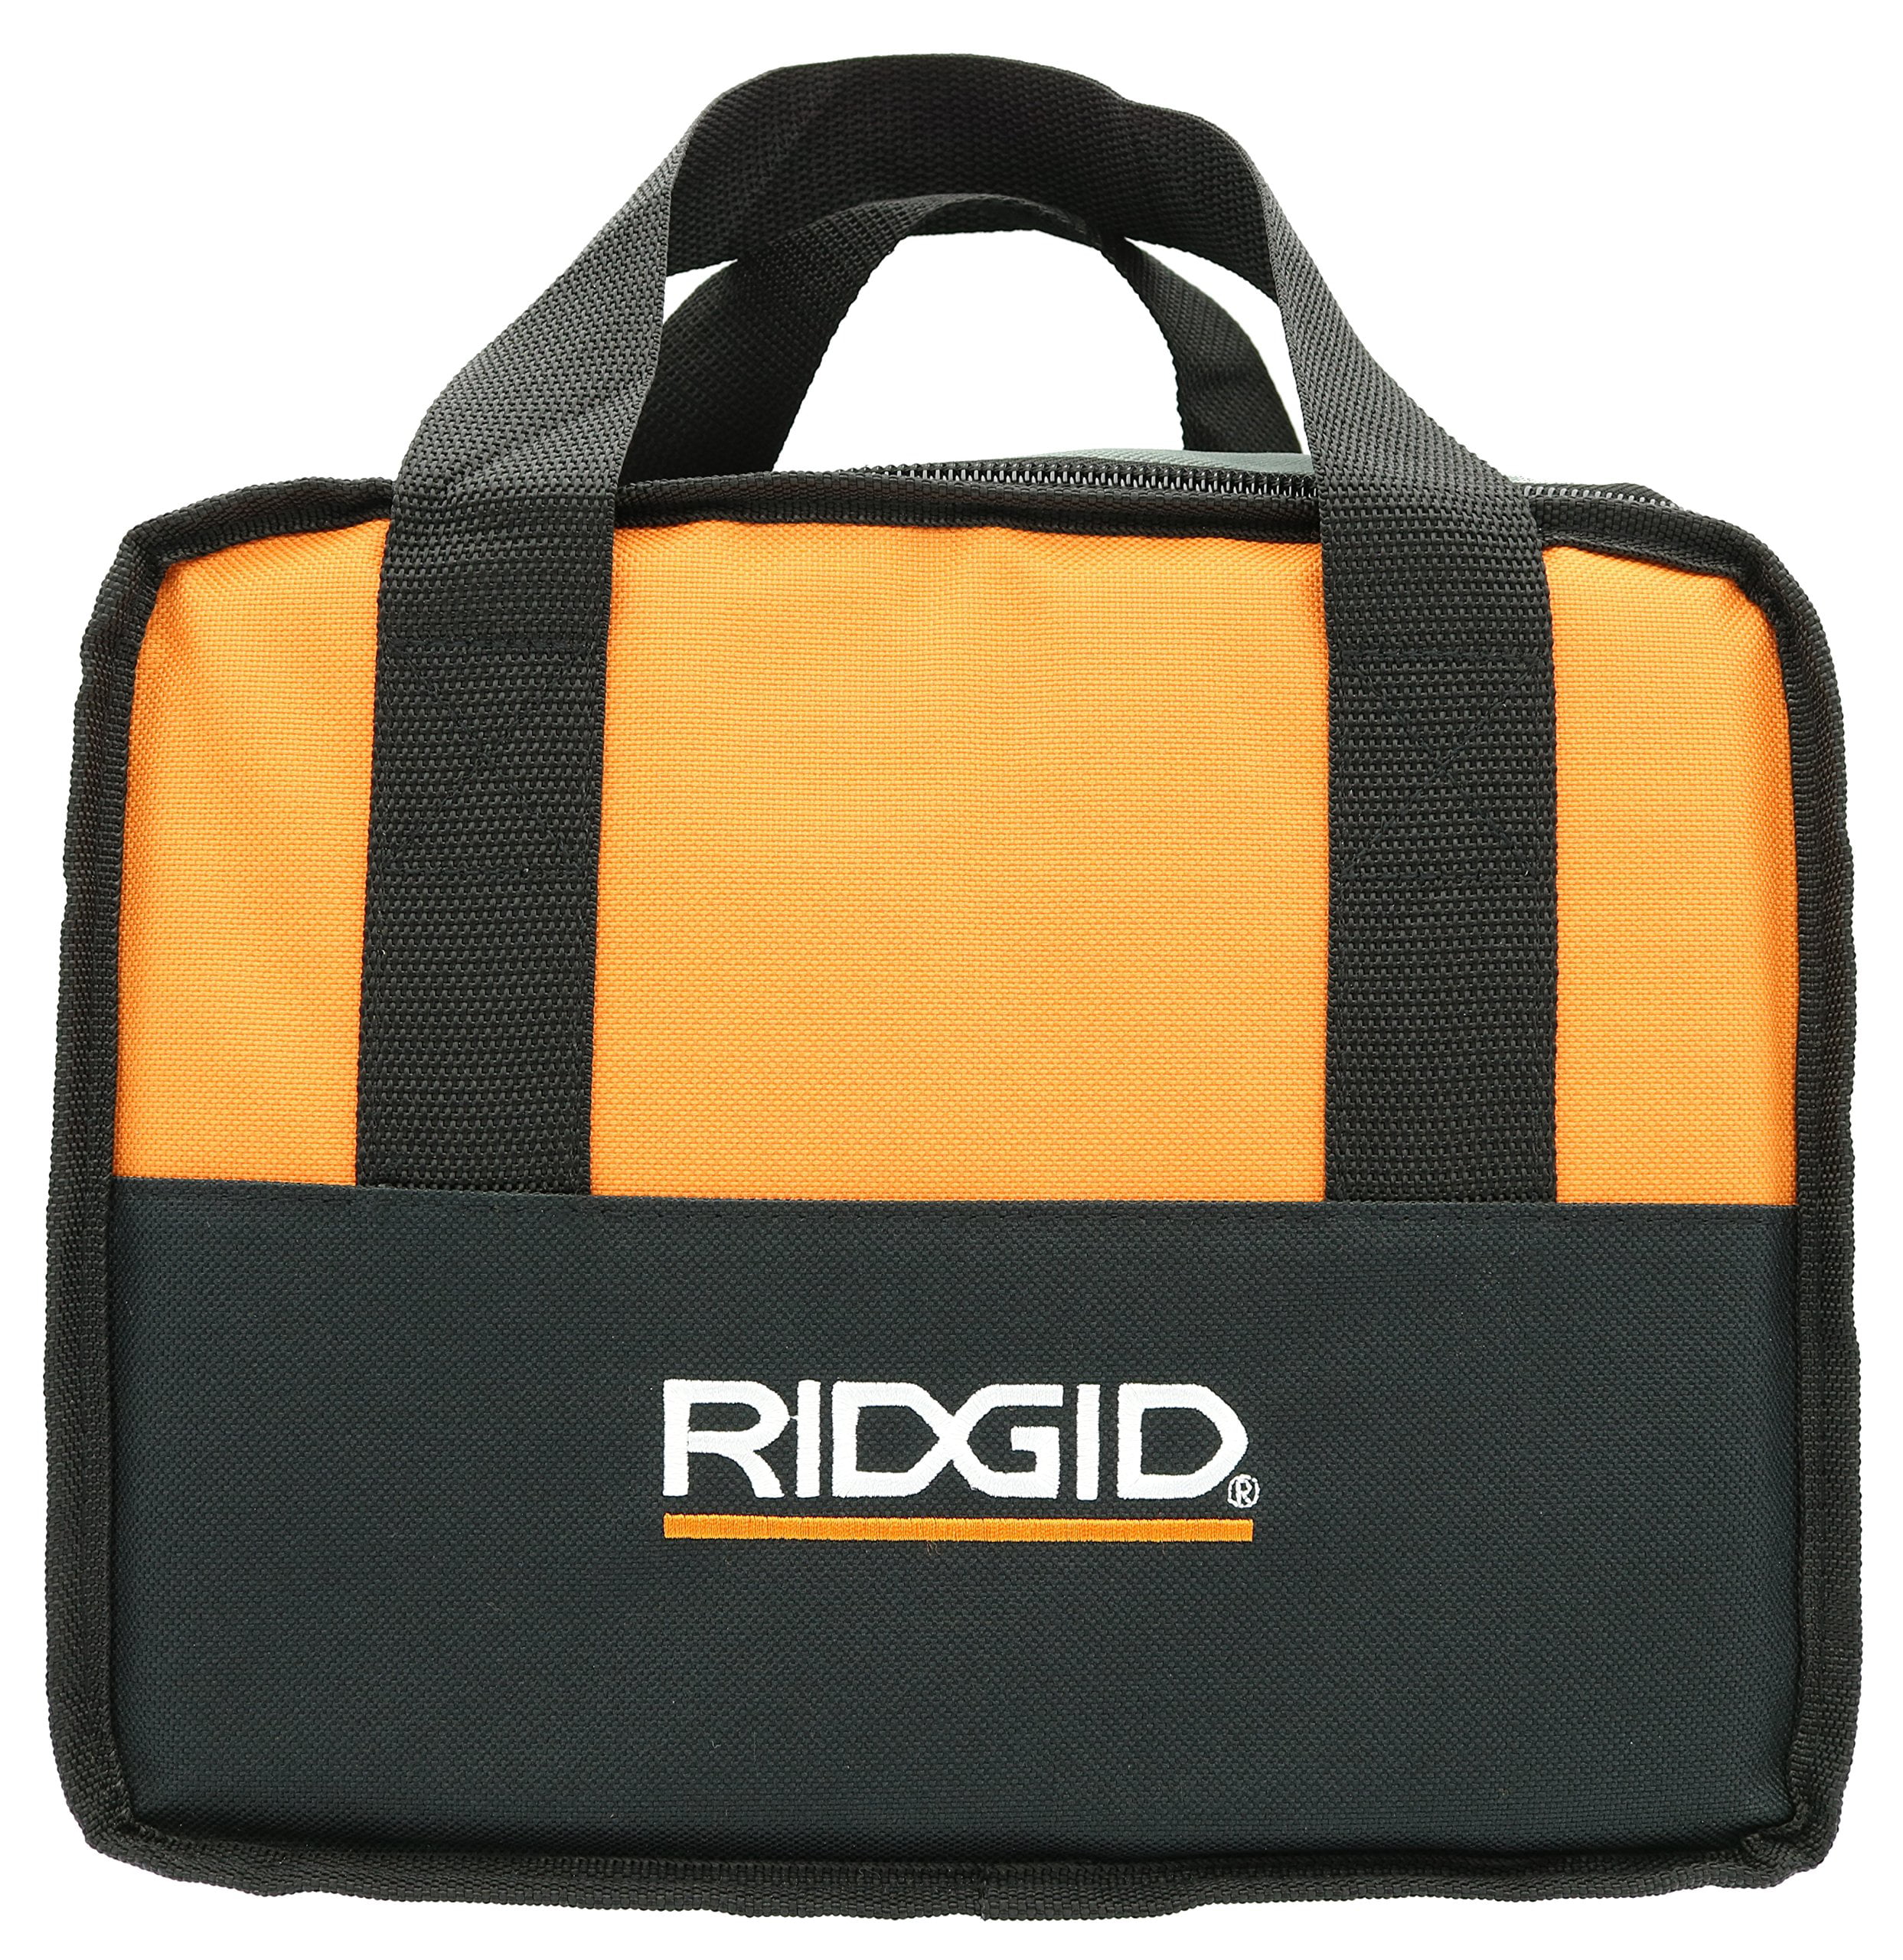 RIDGID Soft Sided Heavy Duty Canvas Contractor's Tool Bag Size 11" x 8" x 6" 